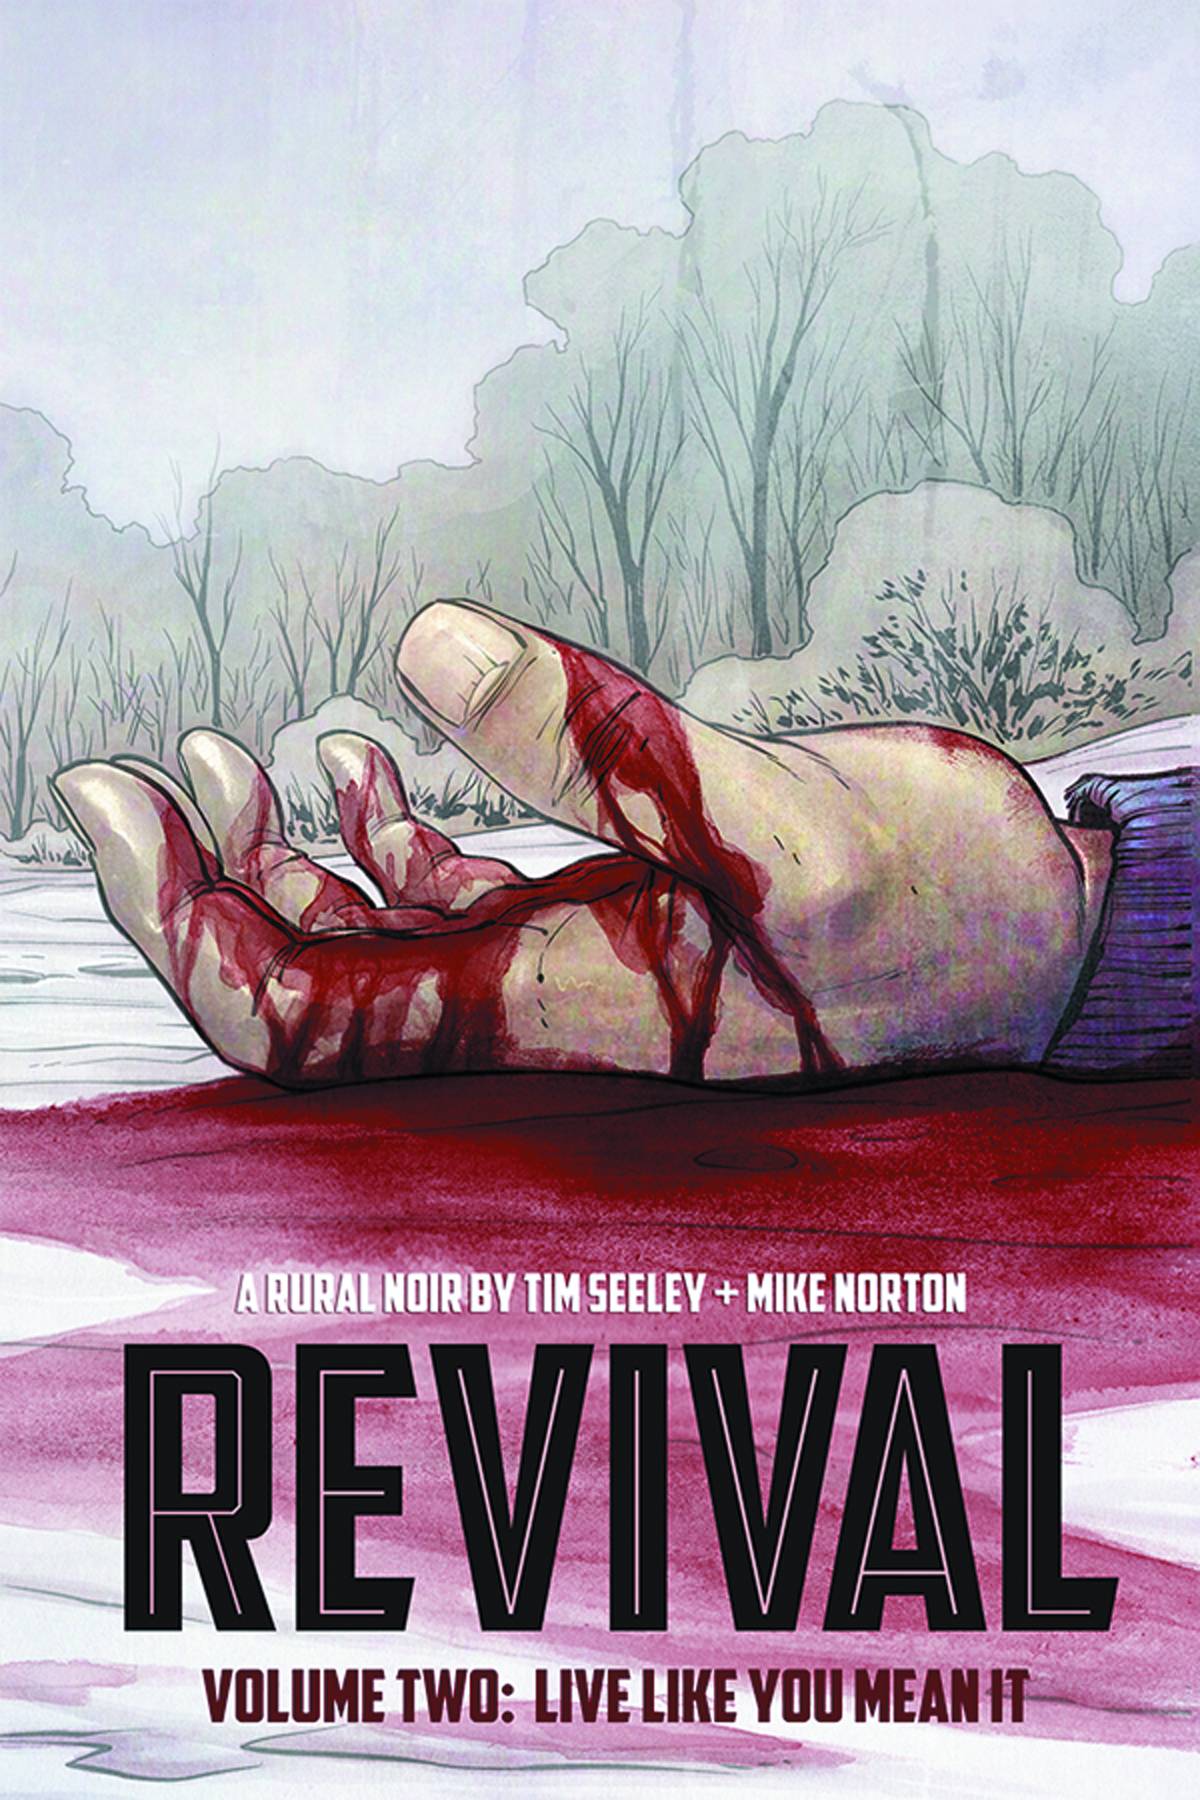 Revival Vol 02: Live Like You Mean It TPB